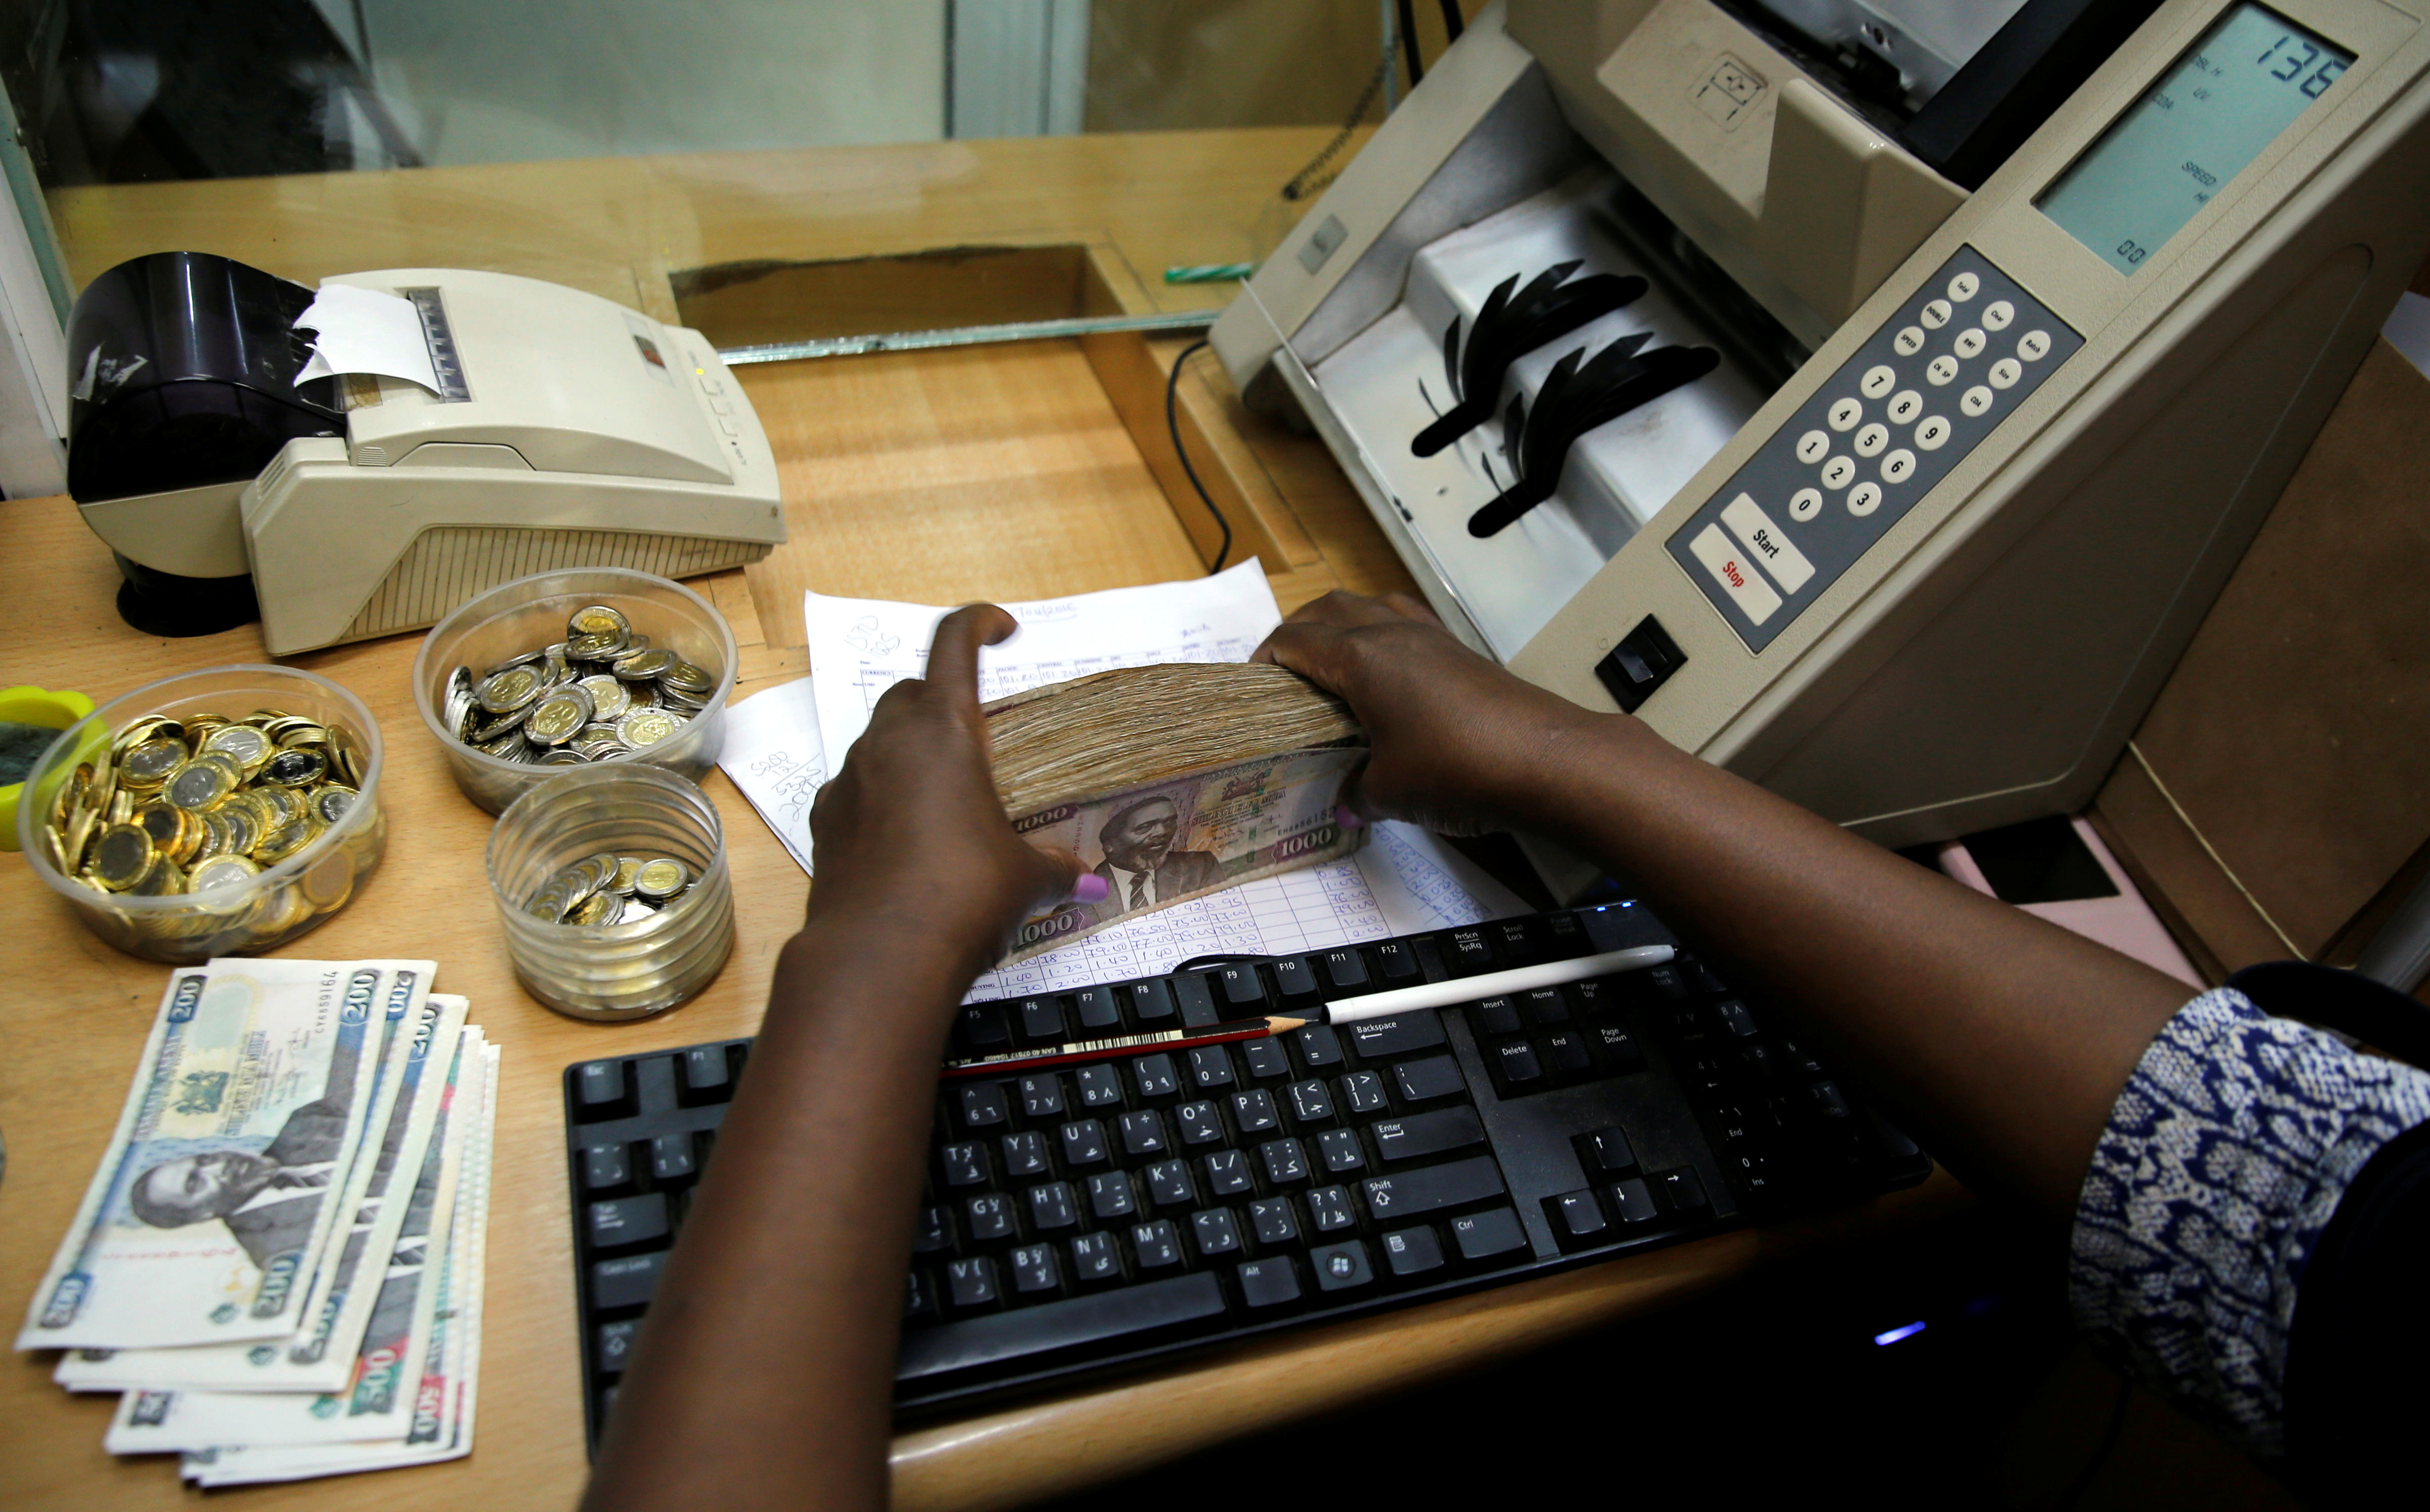 A teller arranges Kenya shilling coins and notes inside the cashier's booth at a forex exchange bureau in Kenya's capital Nairobi